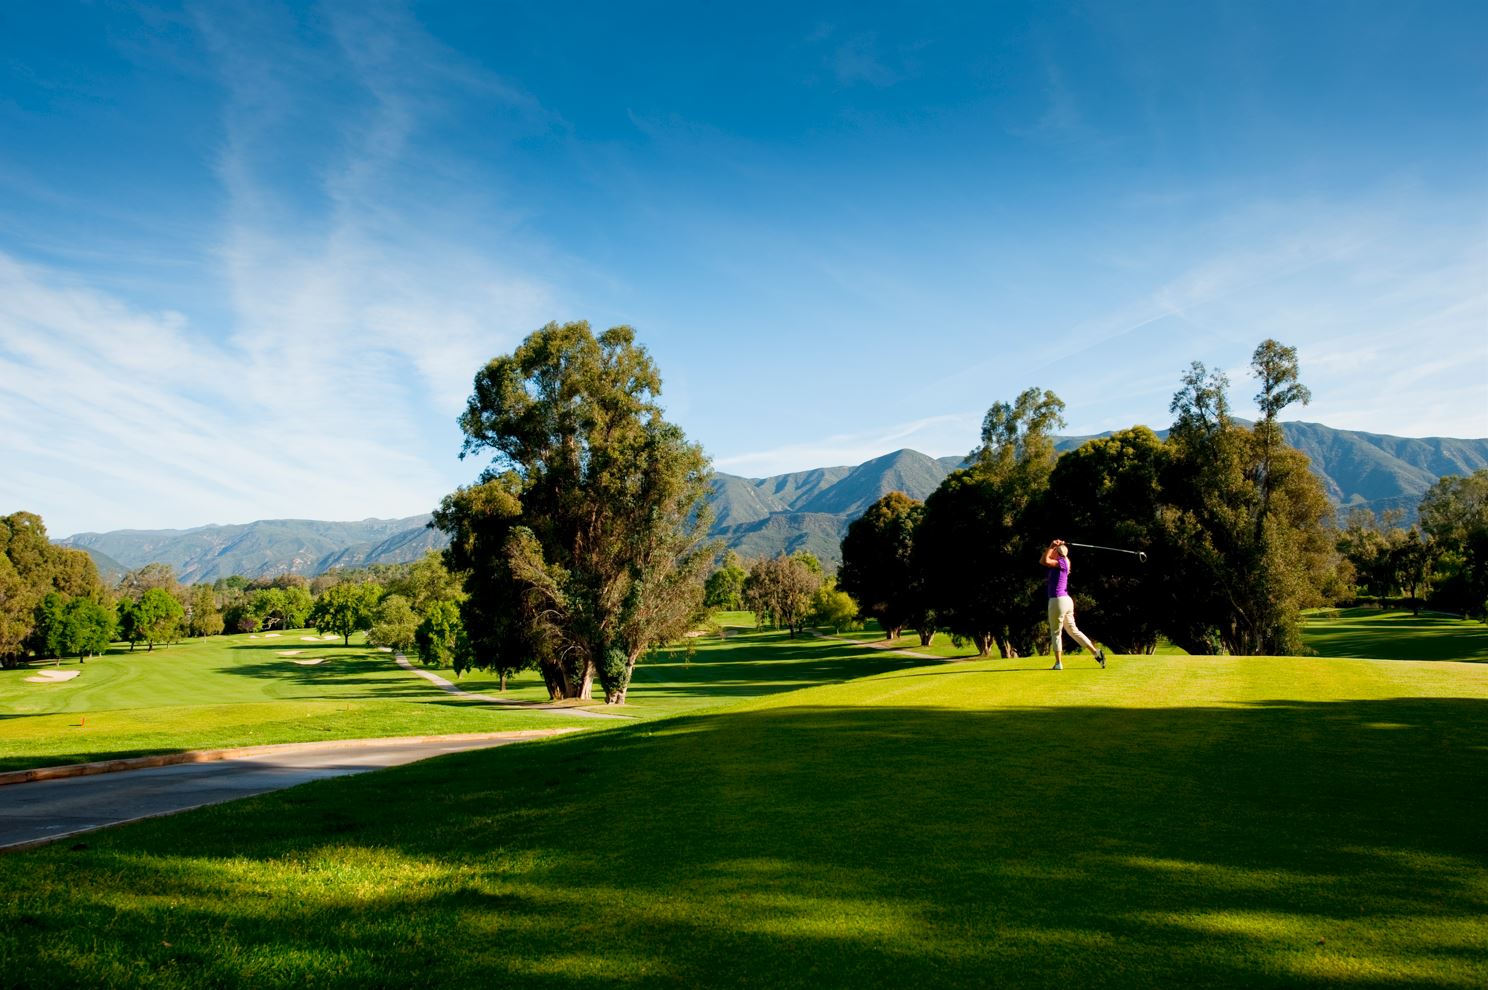 Top 12 Golf Resorts & Destinations to Celebrate National Golf Month